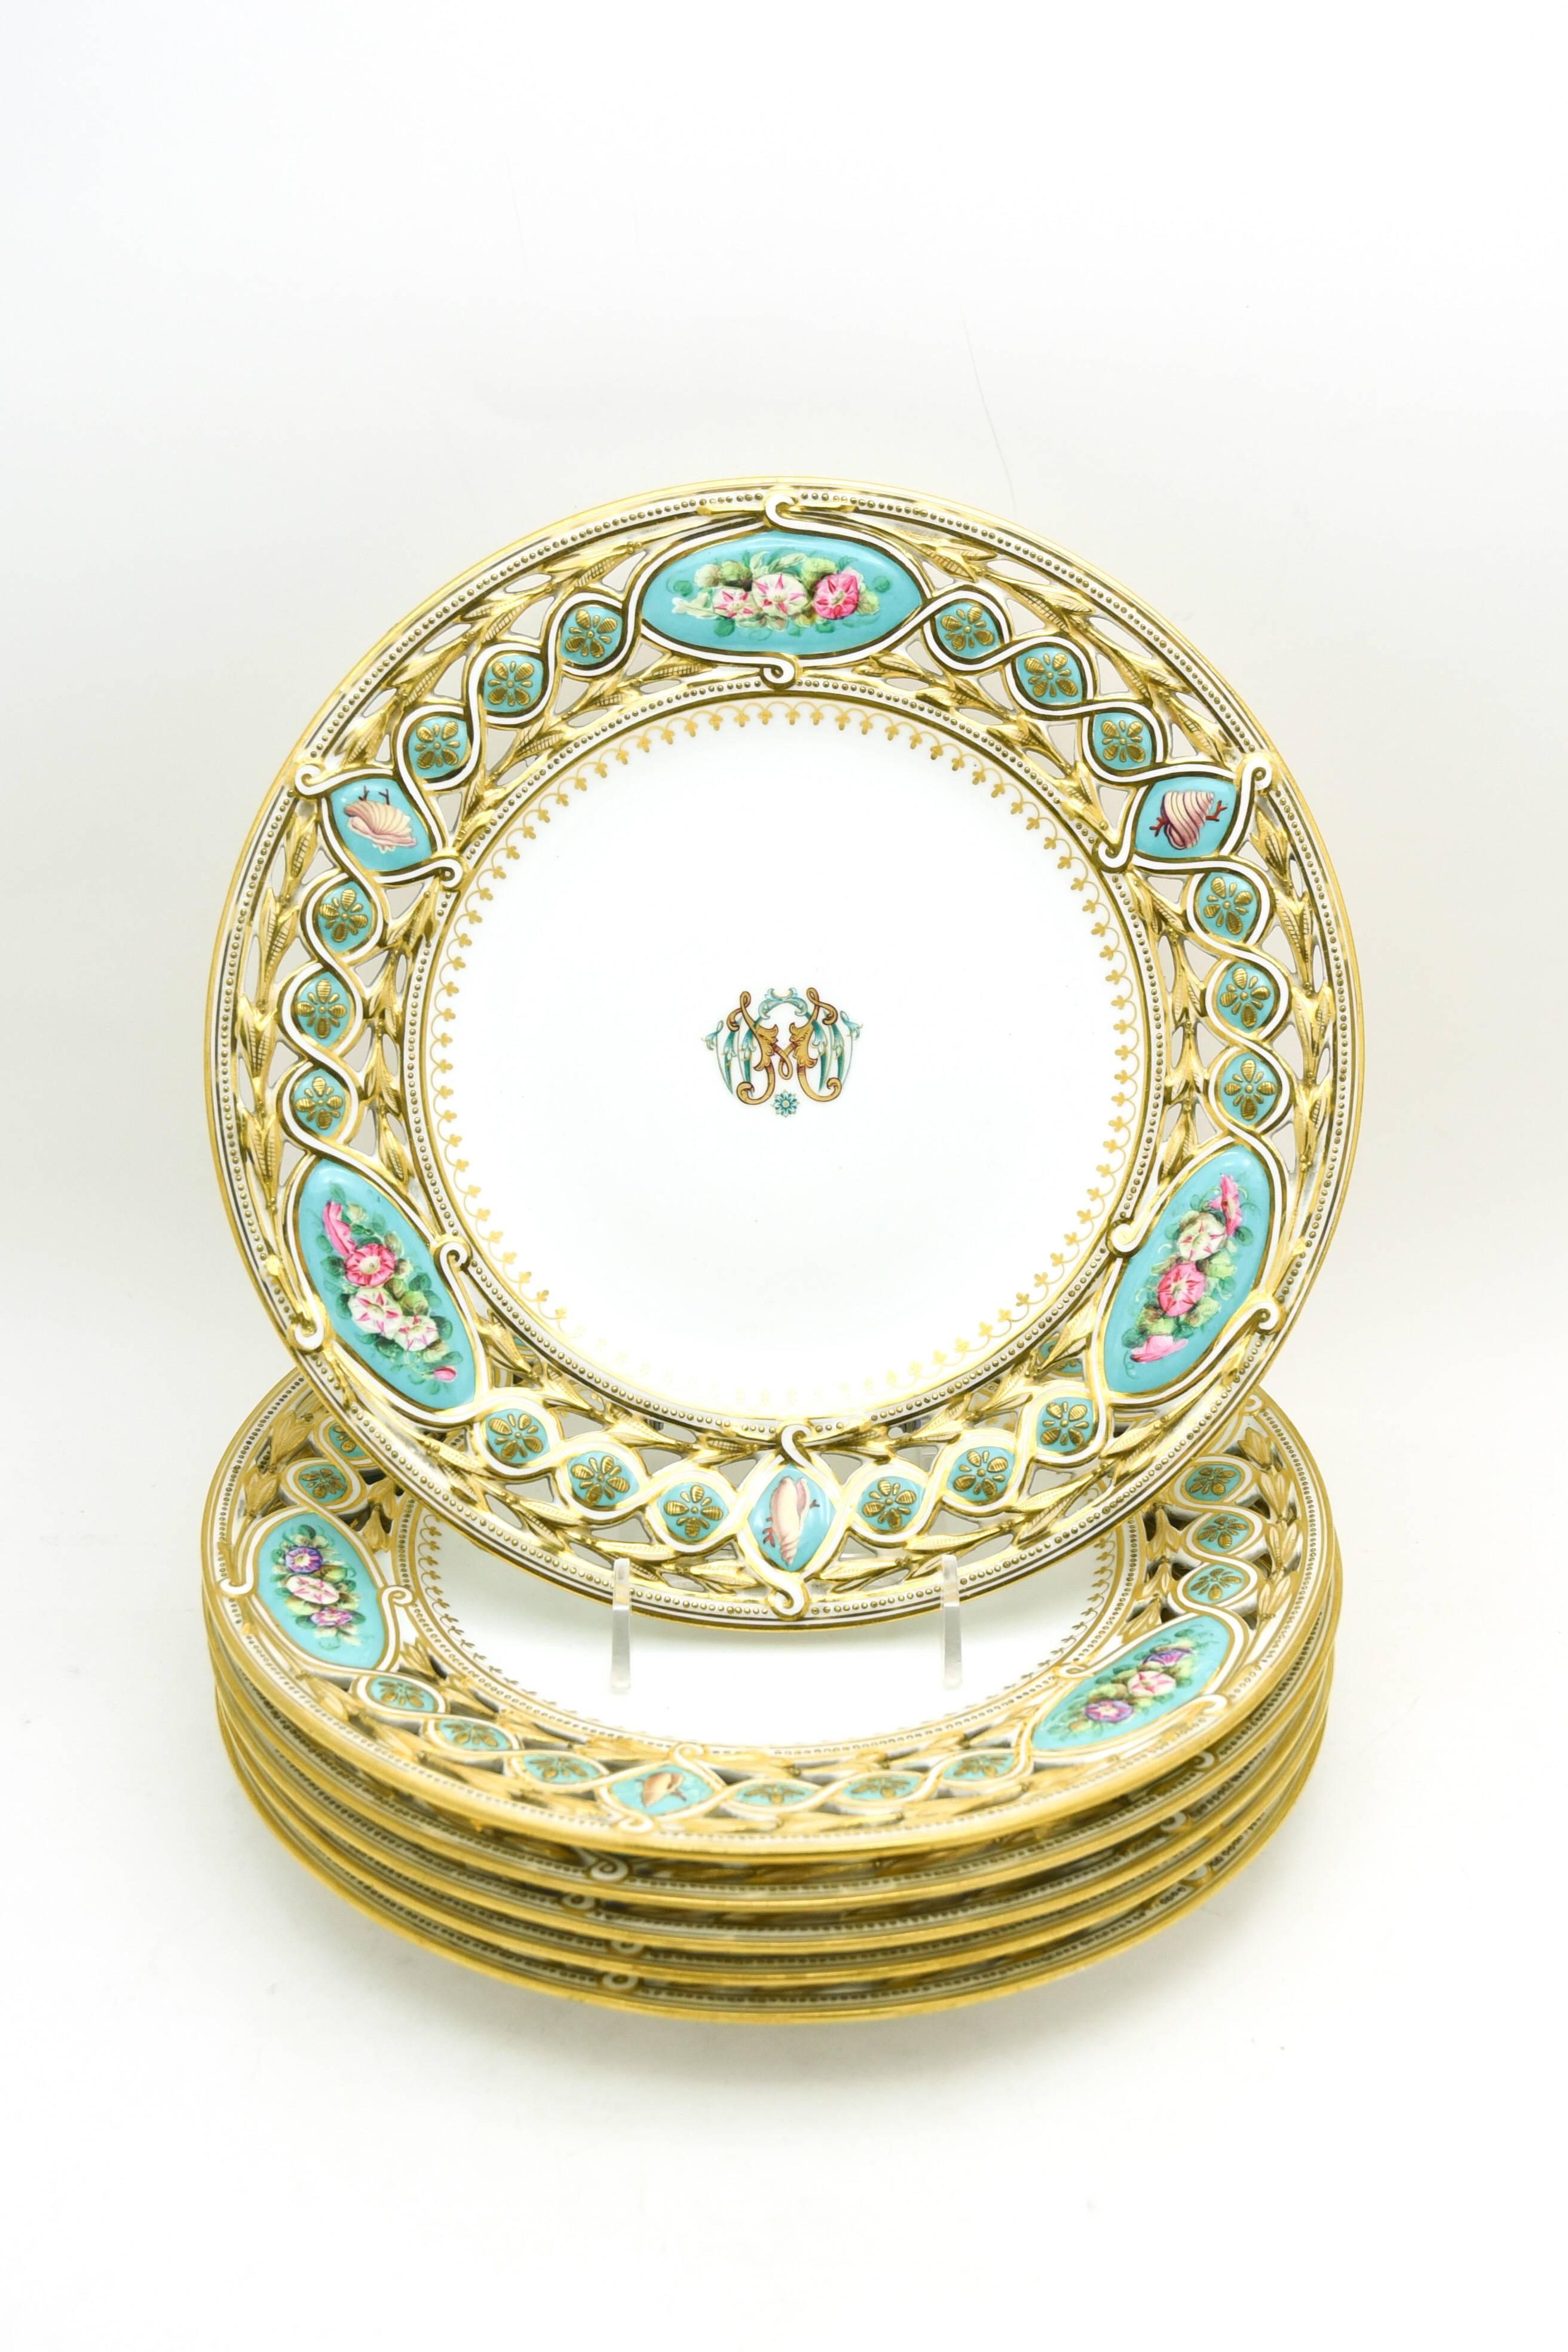 This unusual dessert service consists of six plates and two matching footed compotes with amazingly intricate pierced borders. Each piece is uniquely hand painted with flowers and shells and embellished in gold. The reserves are painted with a soft